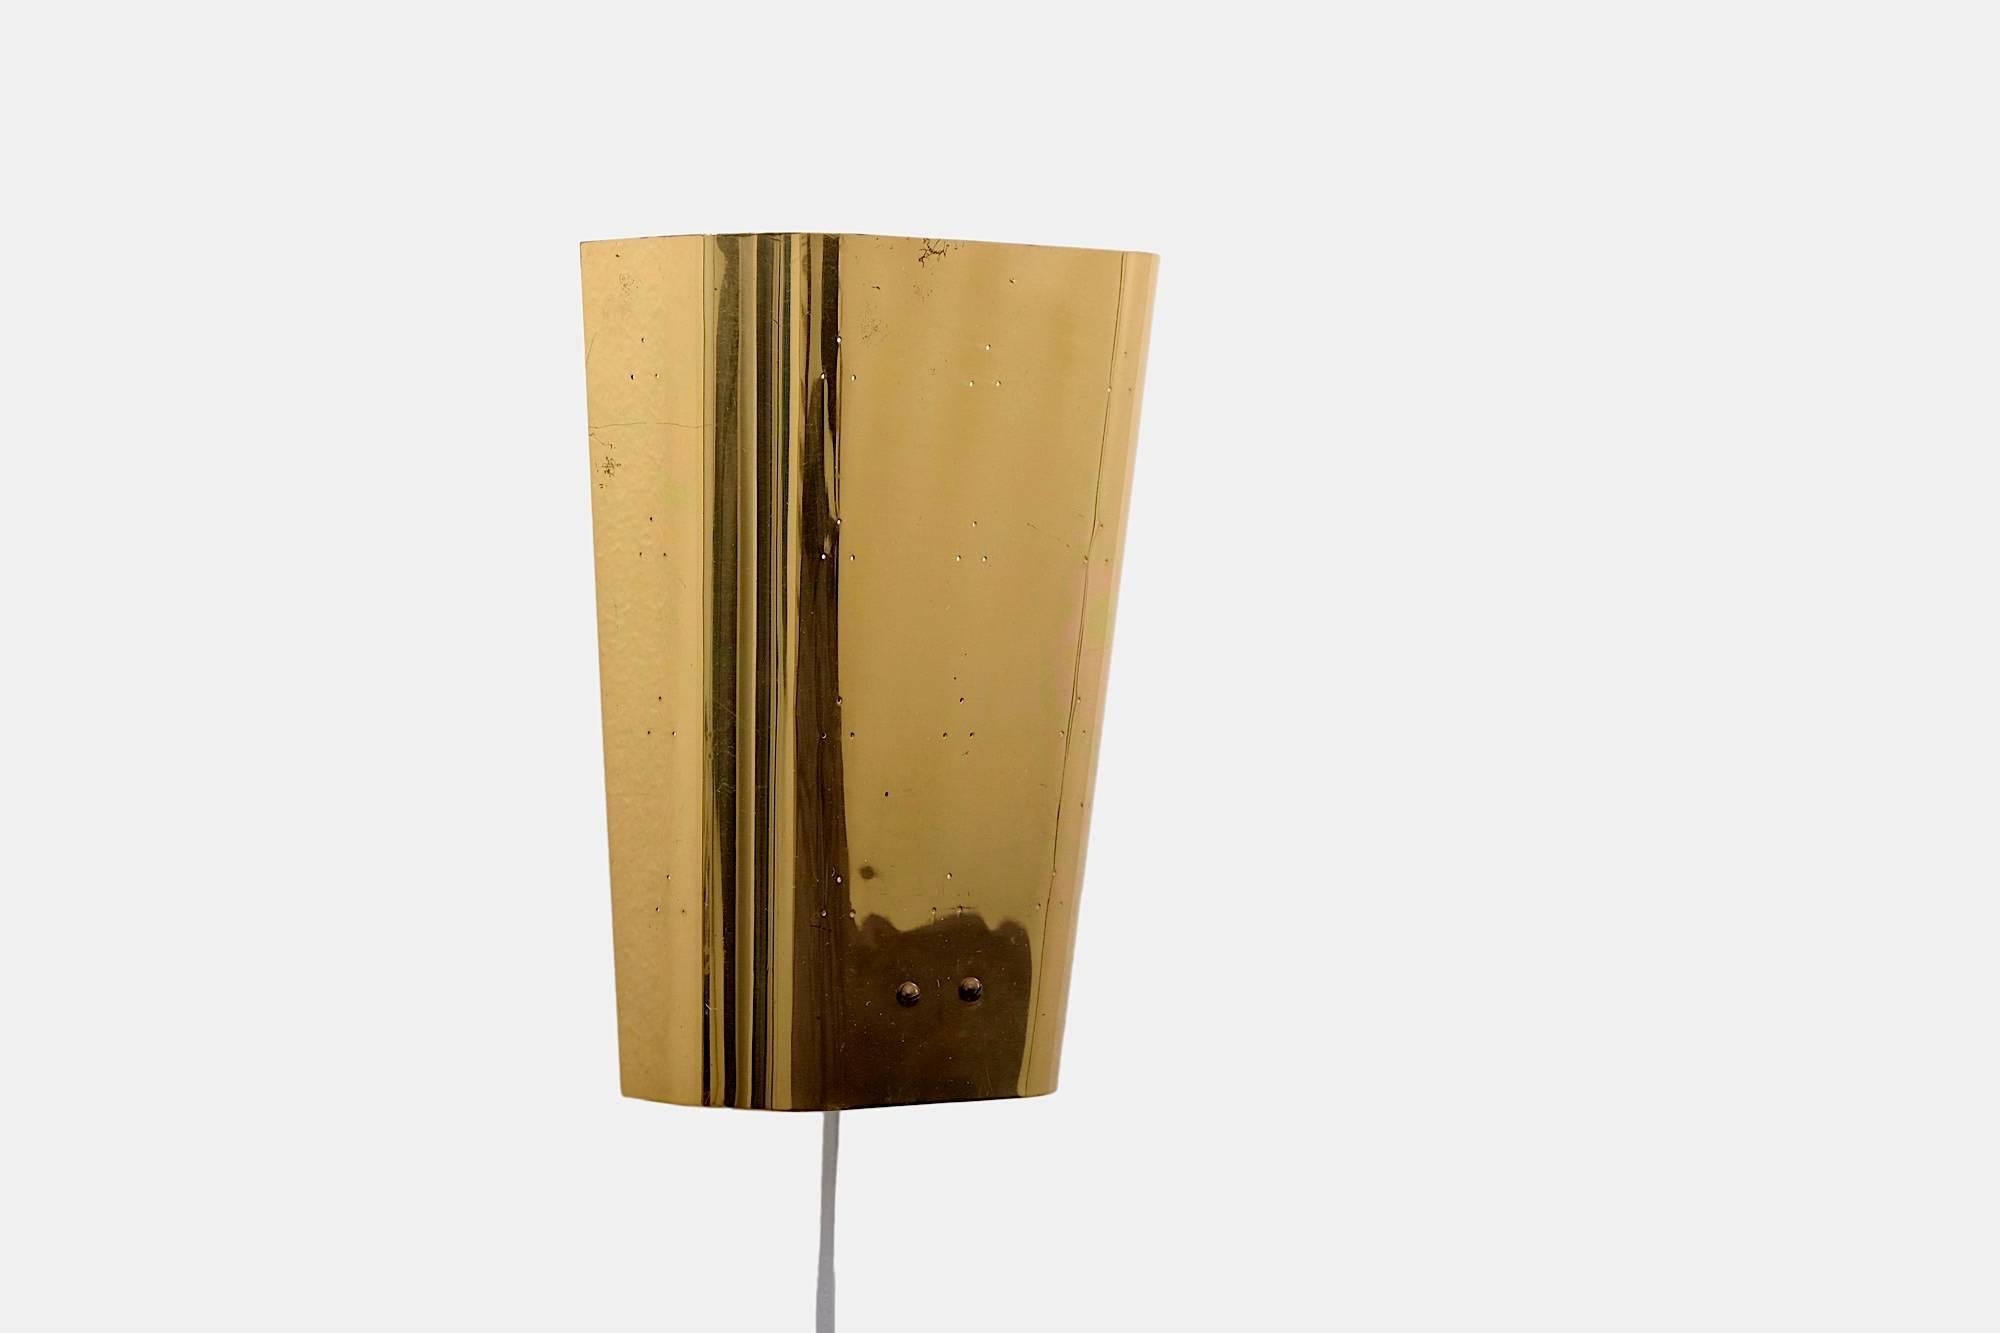 Brass wall lamp model EY 55, designed and manufactured in Finland by Itsu. Two E27 sockets behind a perforated brass plate.

This lamp is in the style of Finnish designers like Lisa Johansson-Pape and Paavo Tynell.